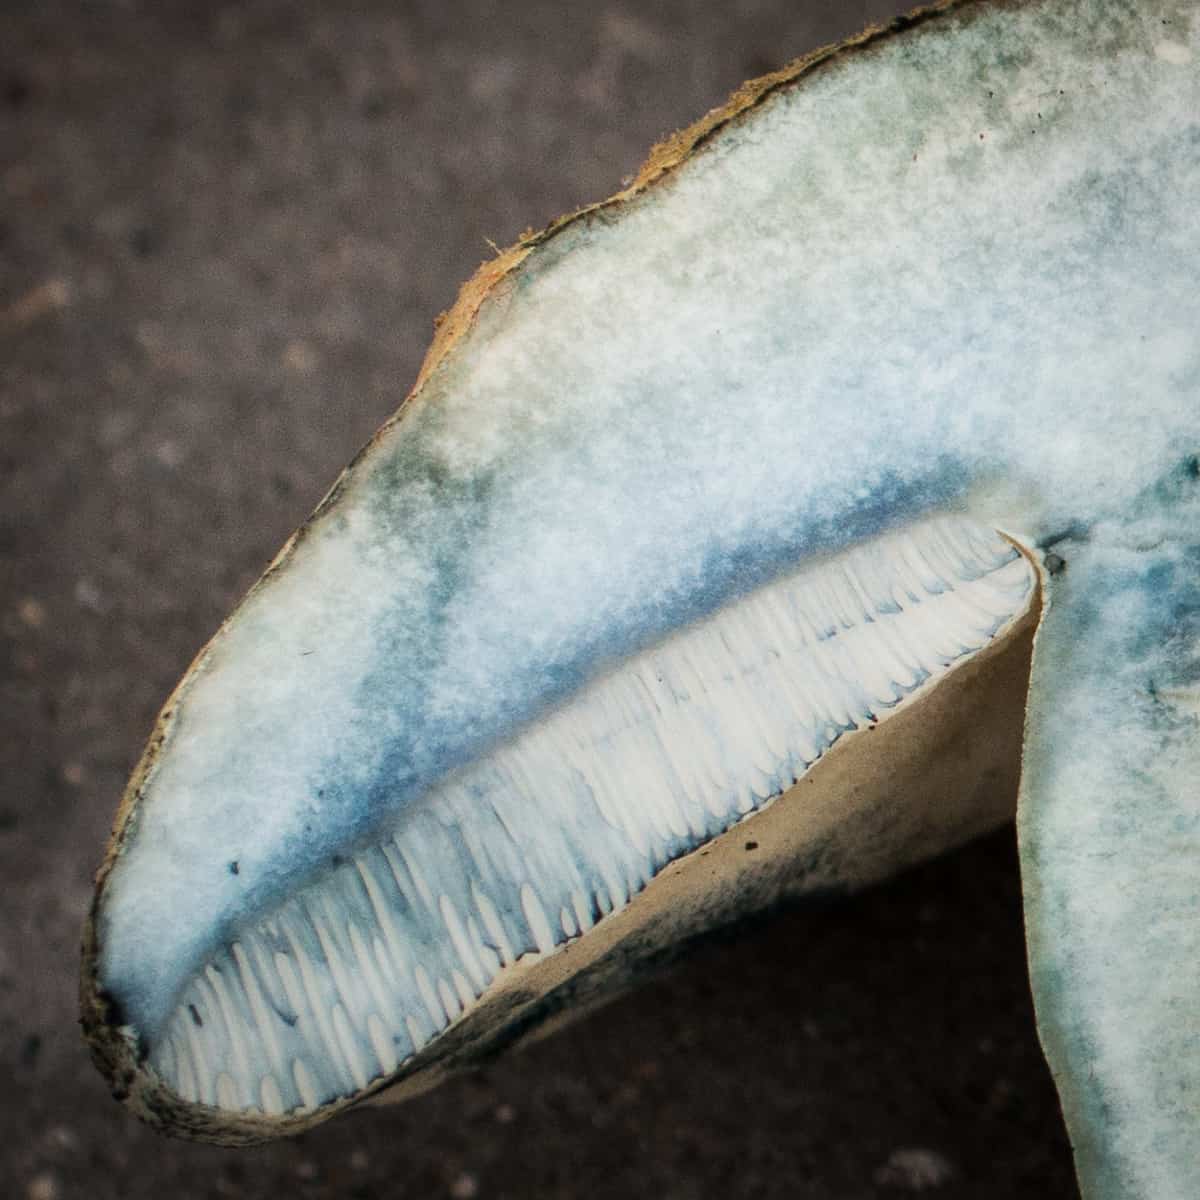 The blue staining pores of Gyroporus cyanescens